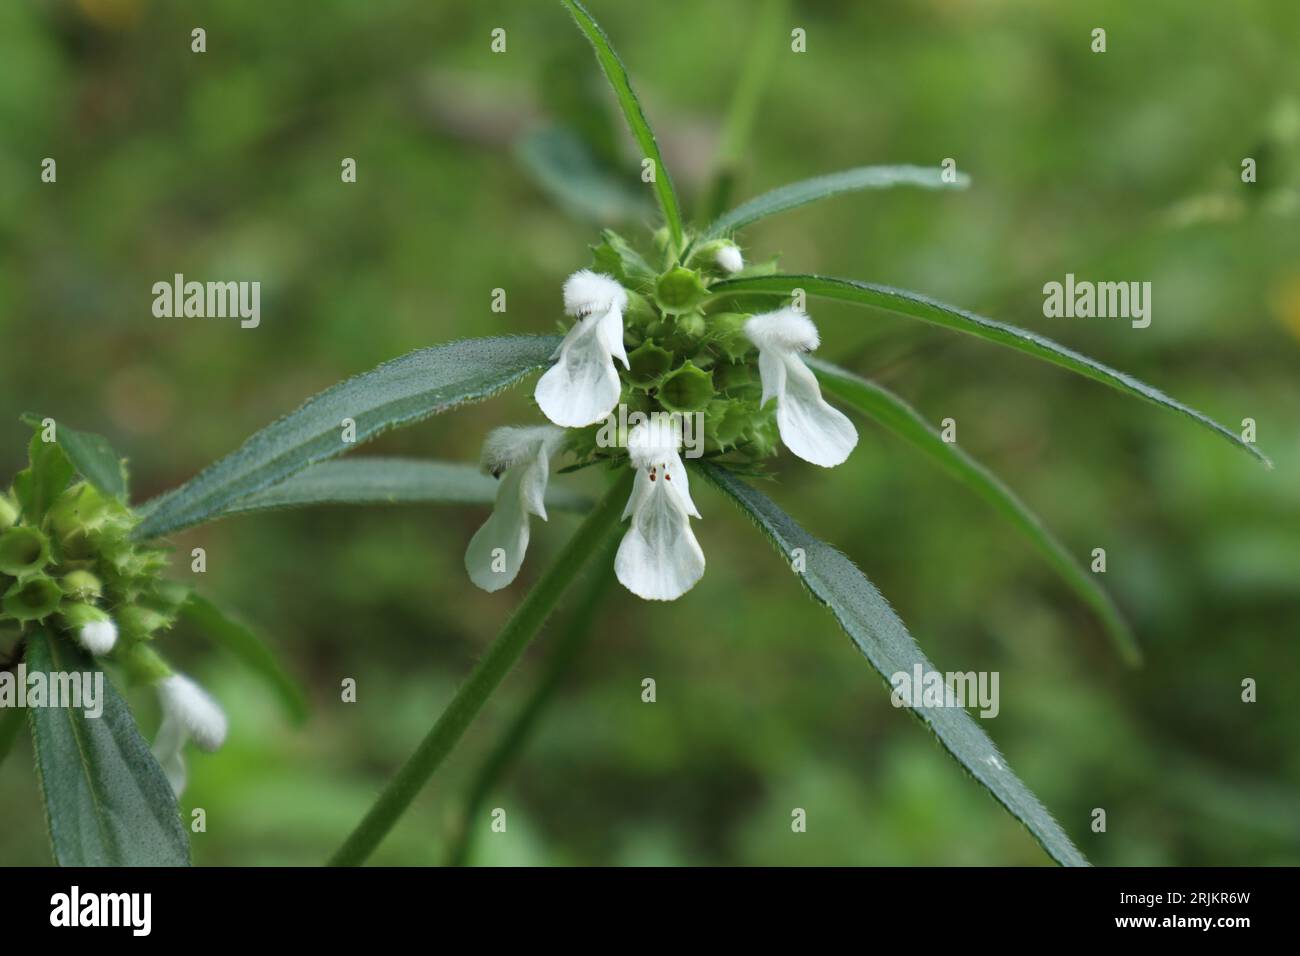 Close up view of a Ceylon slitwort (Leucas Zeylanica) flower cluster with the tiny white flowers and green seeds Stock Photo